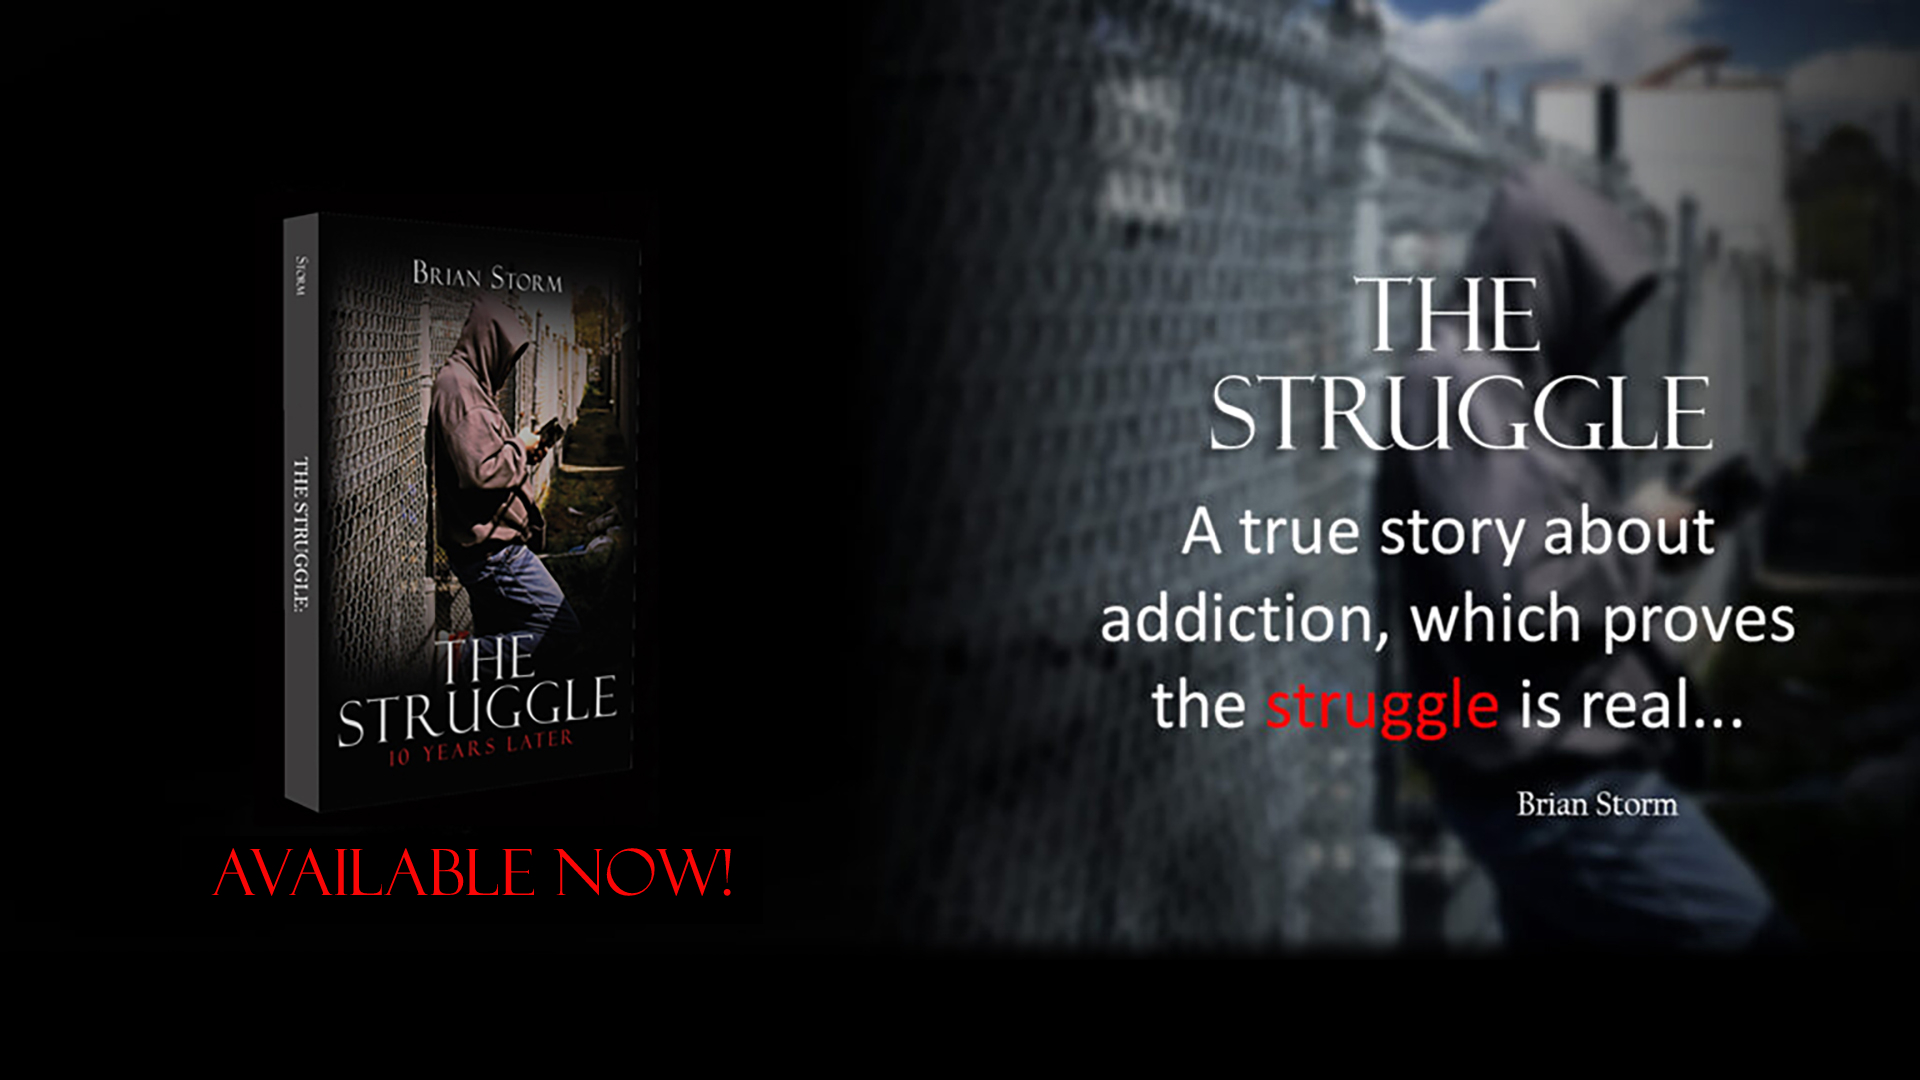 The Struggle: 10 years Later Promo